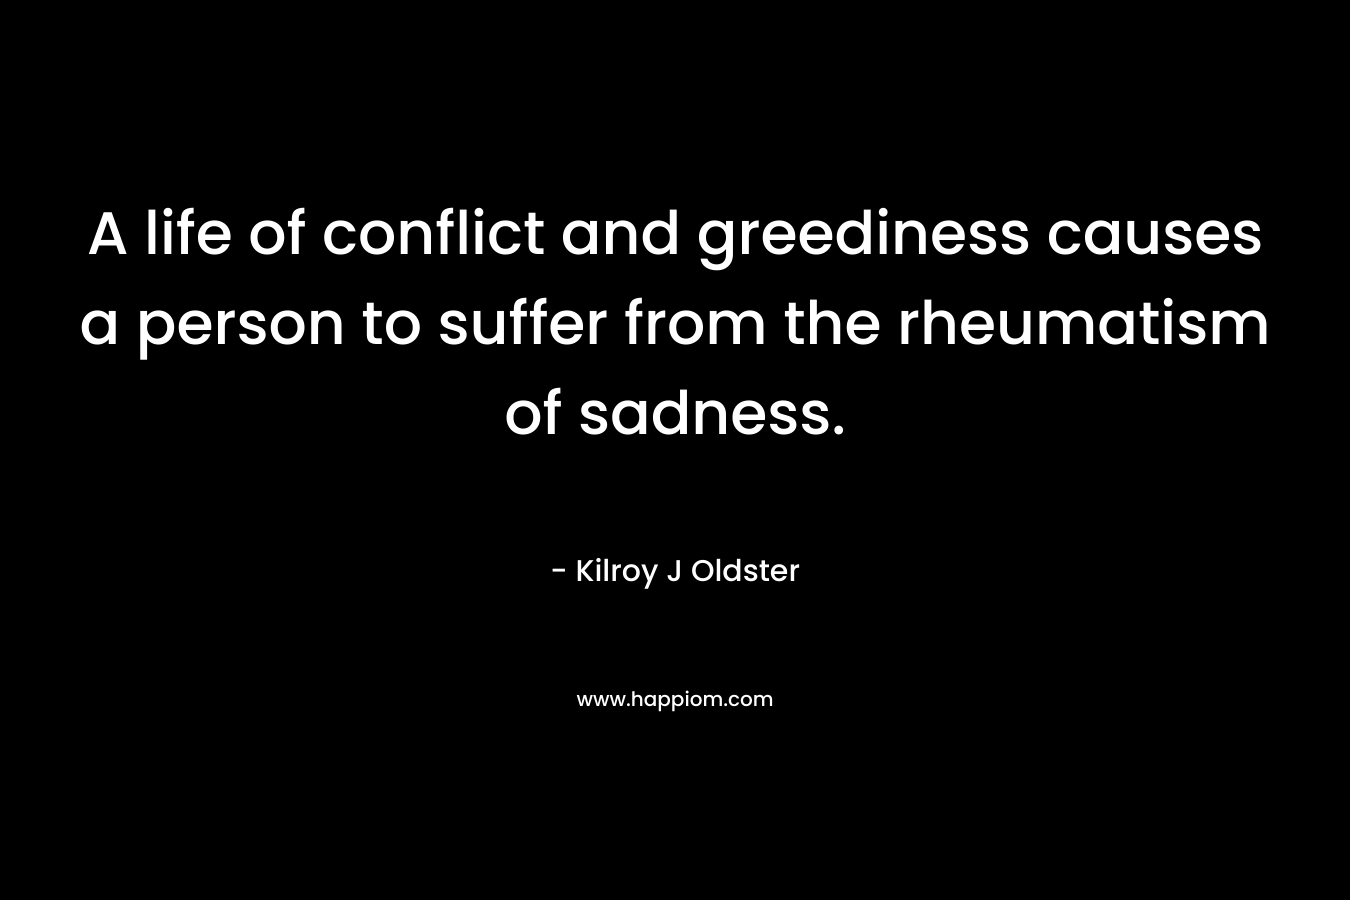 A life of conflict and greediness causes a person to suffer from the rheumatism of sadness.